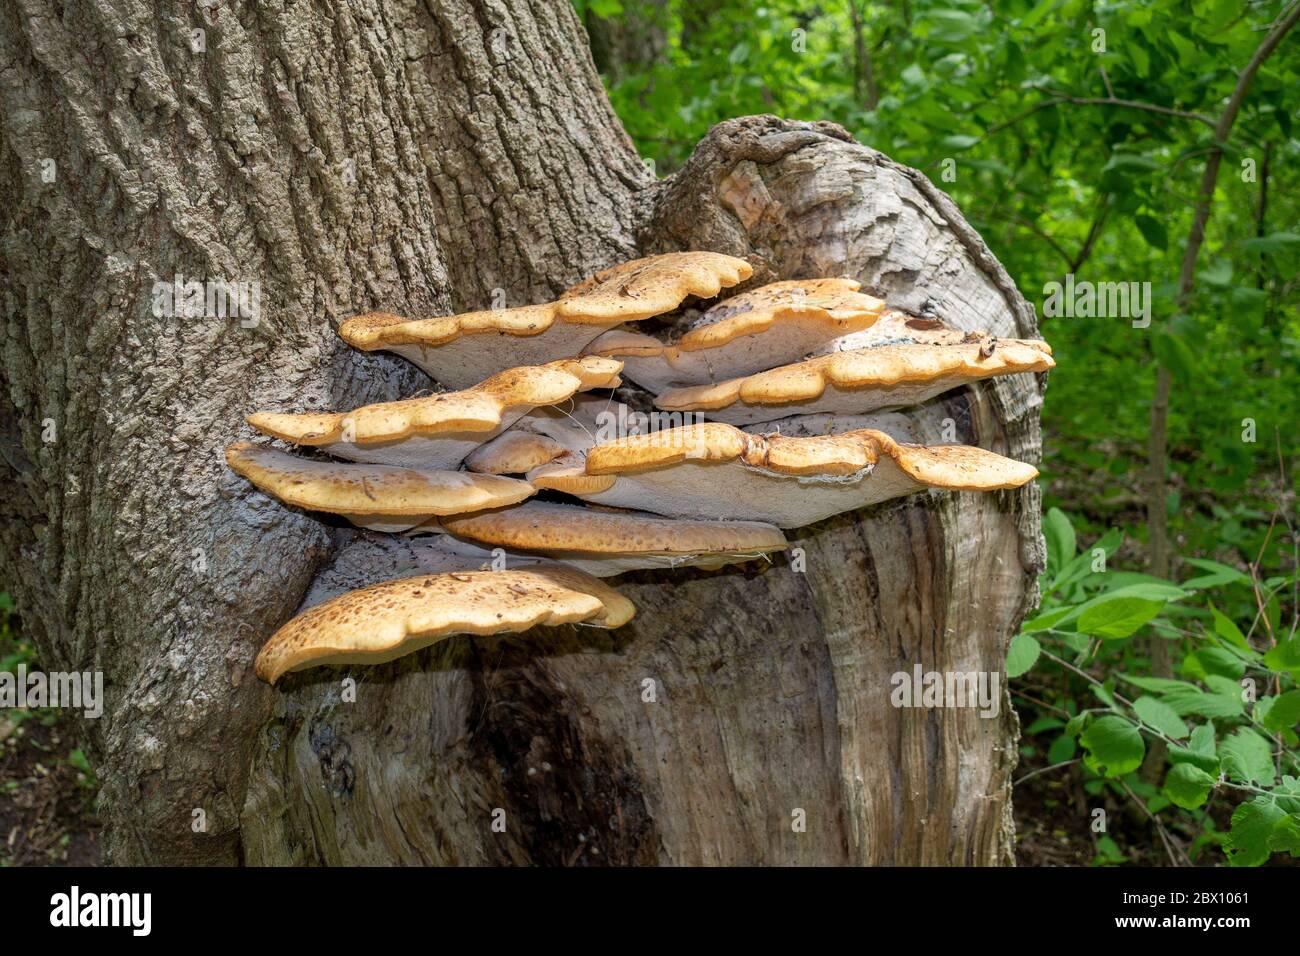 Clusters Of Dryad's Saddle (Polyporus squamosus),  Fungus On A Tree Trunk, Also Known As Scaly Polypore, Pheasants Back In A Forest Stock Photo